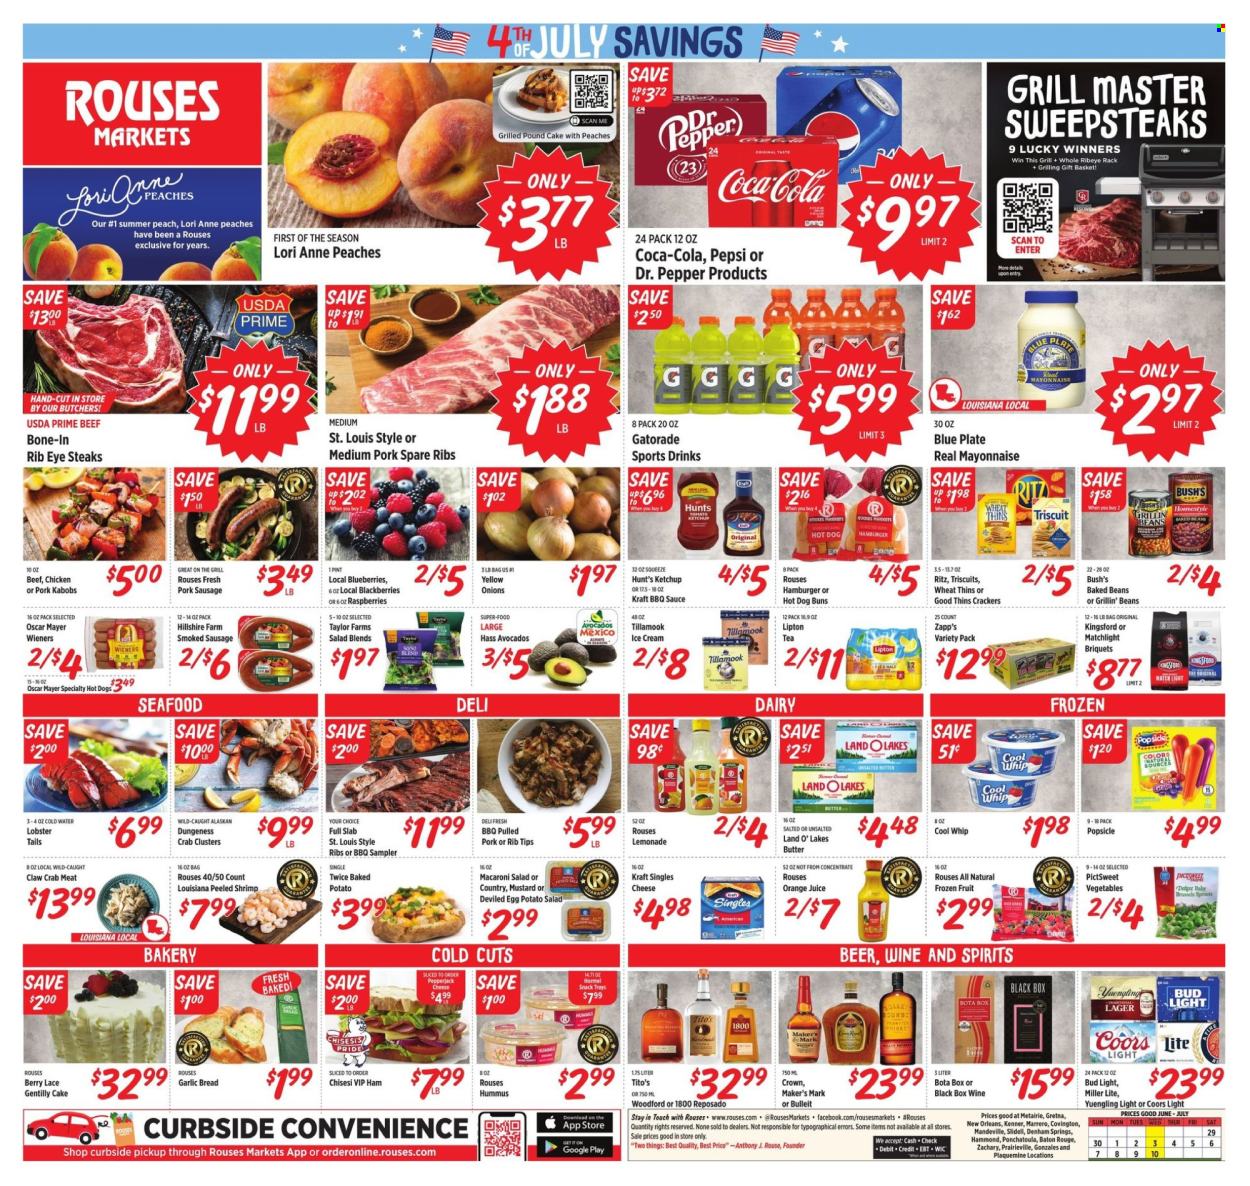 thumbnail - Rouses Markets Flyer - 06/29/2024 - 07/10/2024 - Sales products - hot dog rolls, cake, buns, burger buns, pound cake, salad greens, brussel sprouts, avocado, peaches, crab meat, lobster, seafood, crab, lobster tail, shrimps, crab clusters, pasta, chicken kabobs, macaroni salad, Kraft®, pulled pork, pasta salad, Hormel, Kingsford, ready meal, pork kabobs, kabobs, ham, Hillshire Farm, Oscar Mayer, smoked sausage, pork sausage, frankfurters, hummus, potato salad, sandwich slices, Pepper Jack cheese, Kraft Singles, Cool Whip, mayonnaise, ice cream, popsicle, frozen fruit, crackers, RITZ, Thins, baked beans, BBQ sauce, mustard, ketchup, sauce, Coca-Cola, lemonade, Pepsi, orange juice, juice, Lipton, Dr. Pepper, soft drink, Gatorade, electrolyte drink, water, carbonated soft drink, wine, alcohol, bourbon, whisky, beer, Bud Light, Lager, meat skewer, beef meat, steak, ribs, pork meat, pork ribs, pork spare ribs, Miller Lite, Coors, Yuengling. Page 1.